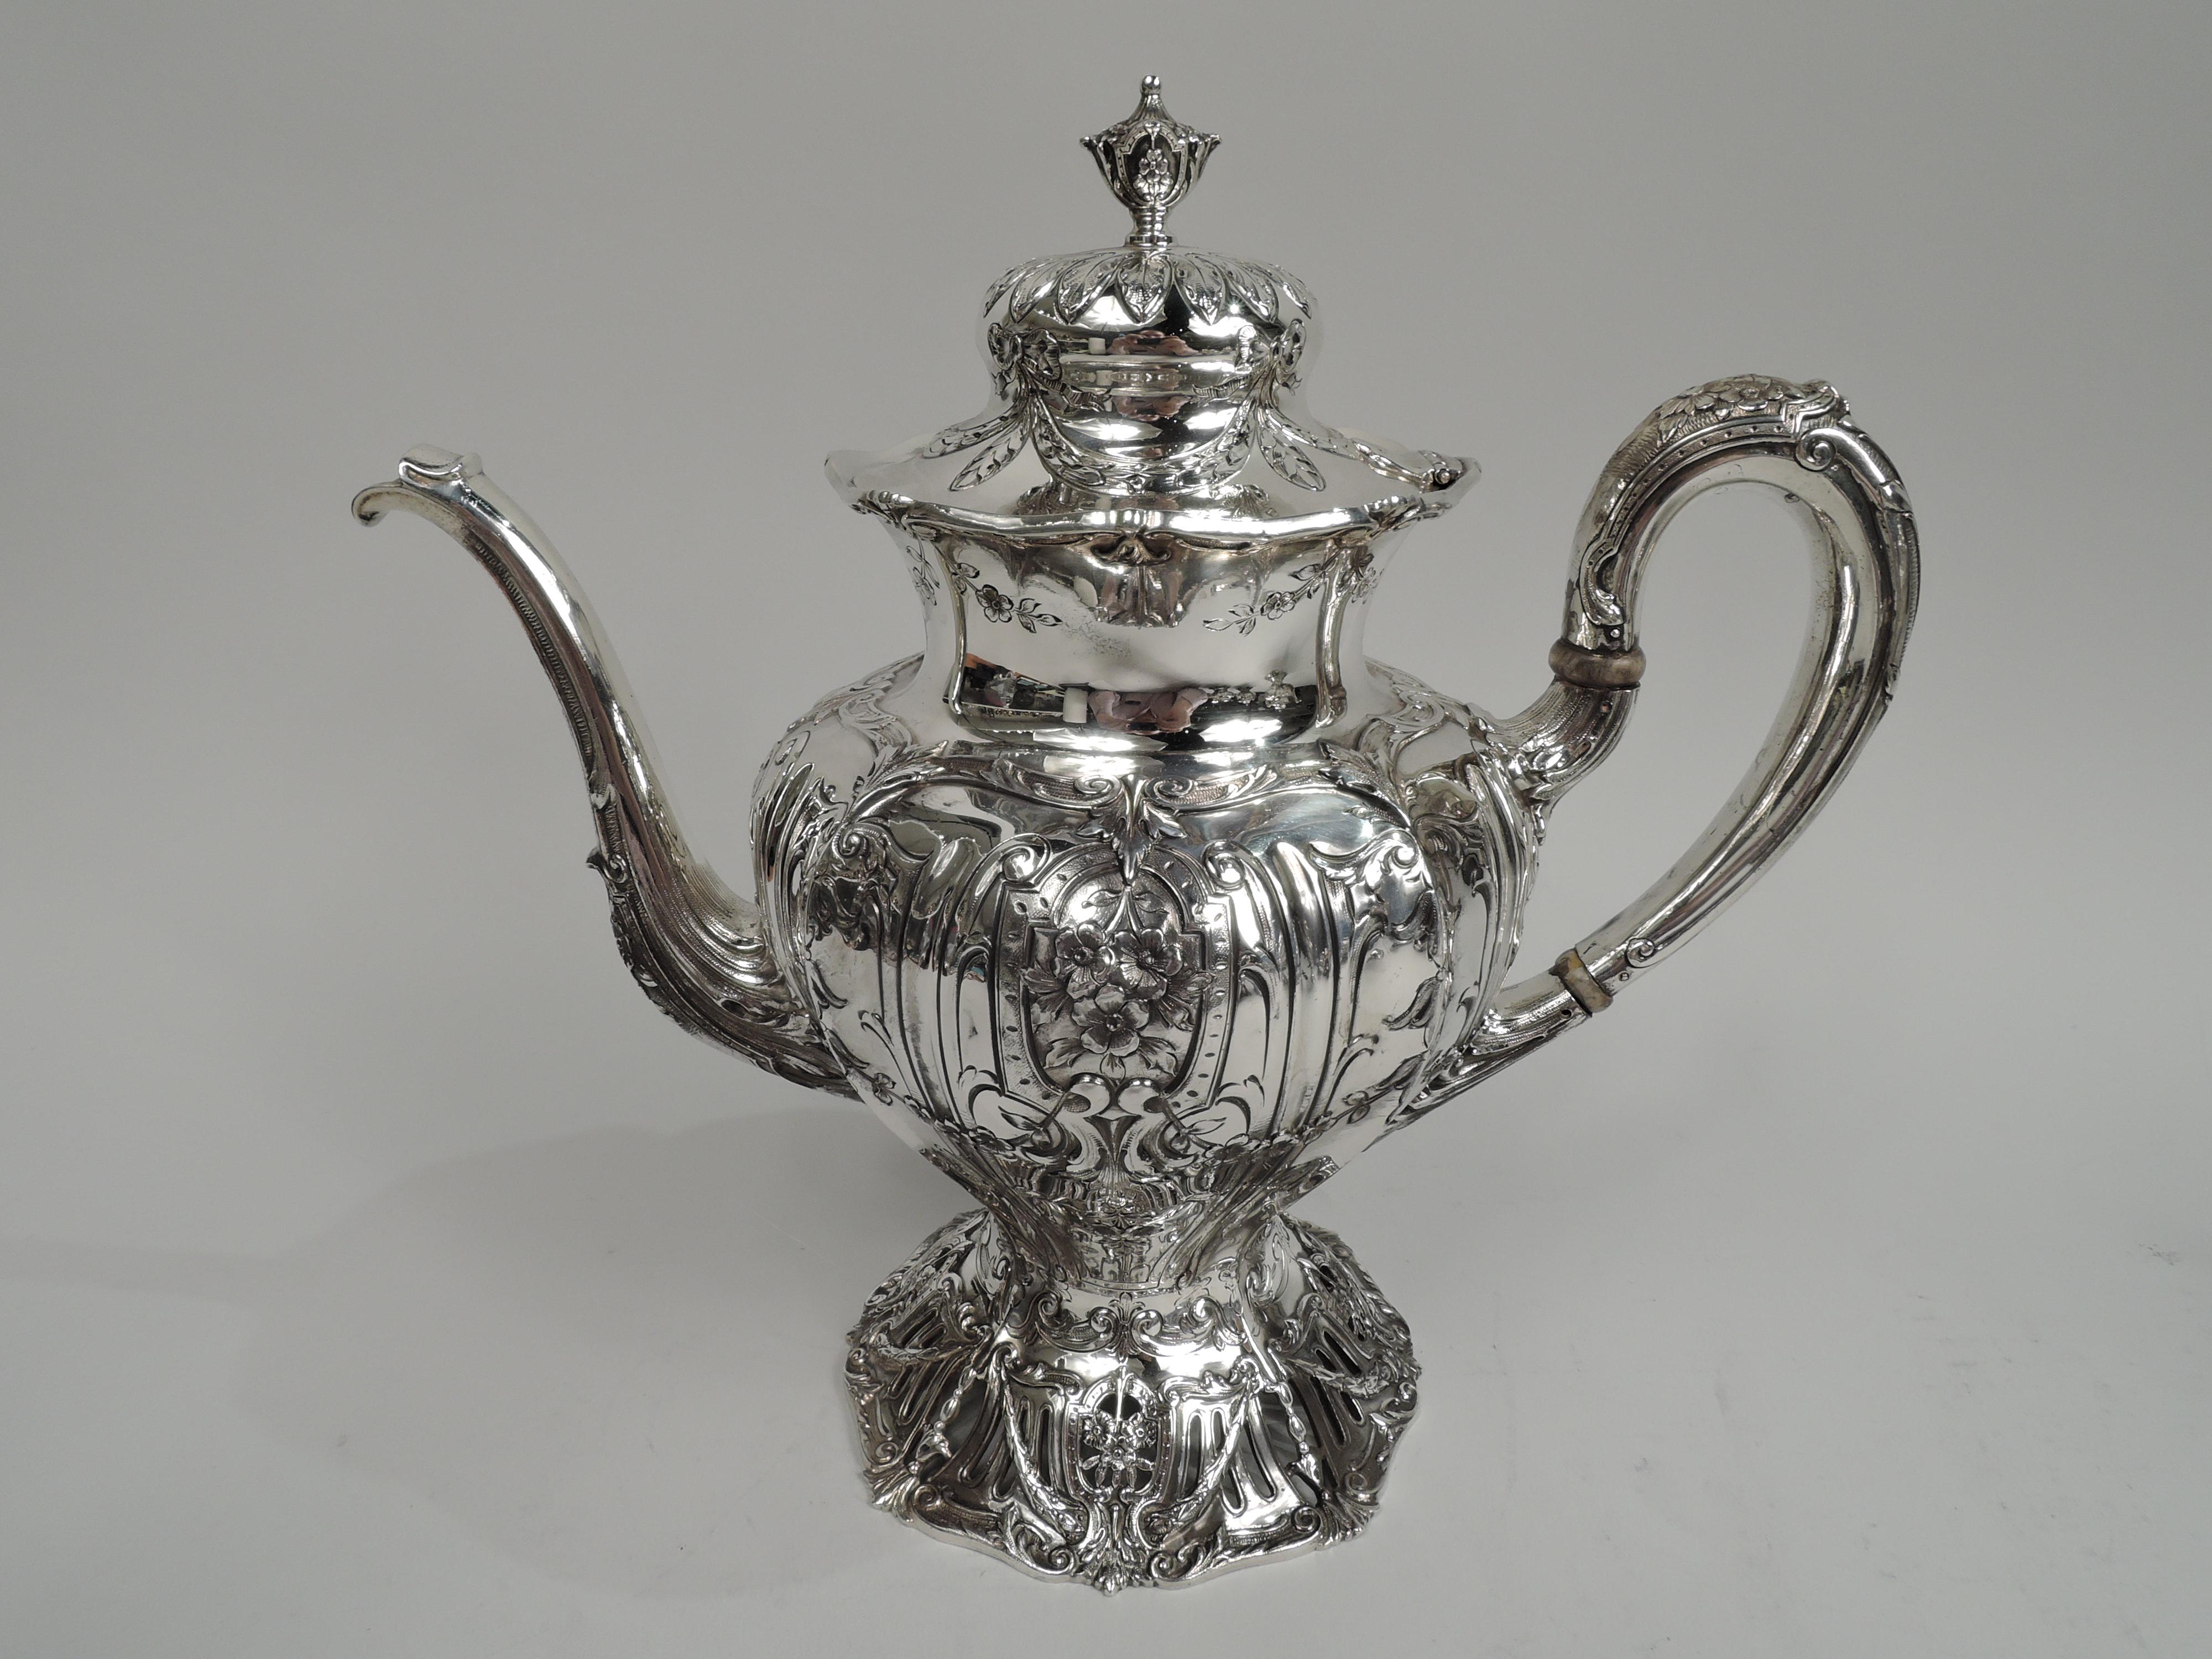 Edwardian Regency sterling silver 5-piece coffee and tea set on tray. Made by Graff, Washbourne & Dunn in New York, ca 1909. This set comprises coffeepot, teapot, creamer, sugar, and waste bowl on tray. Ovoid bodies, high-looping handles, double